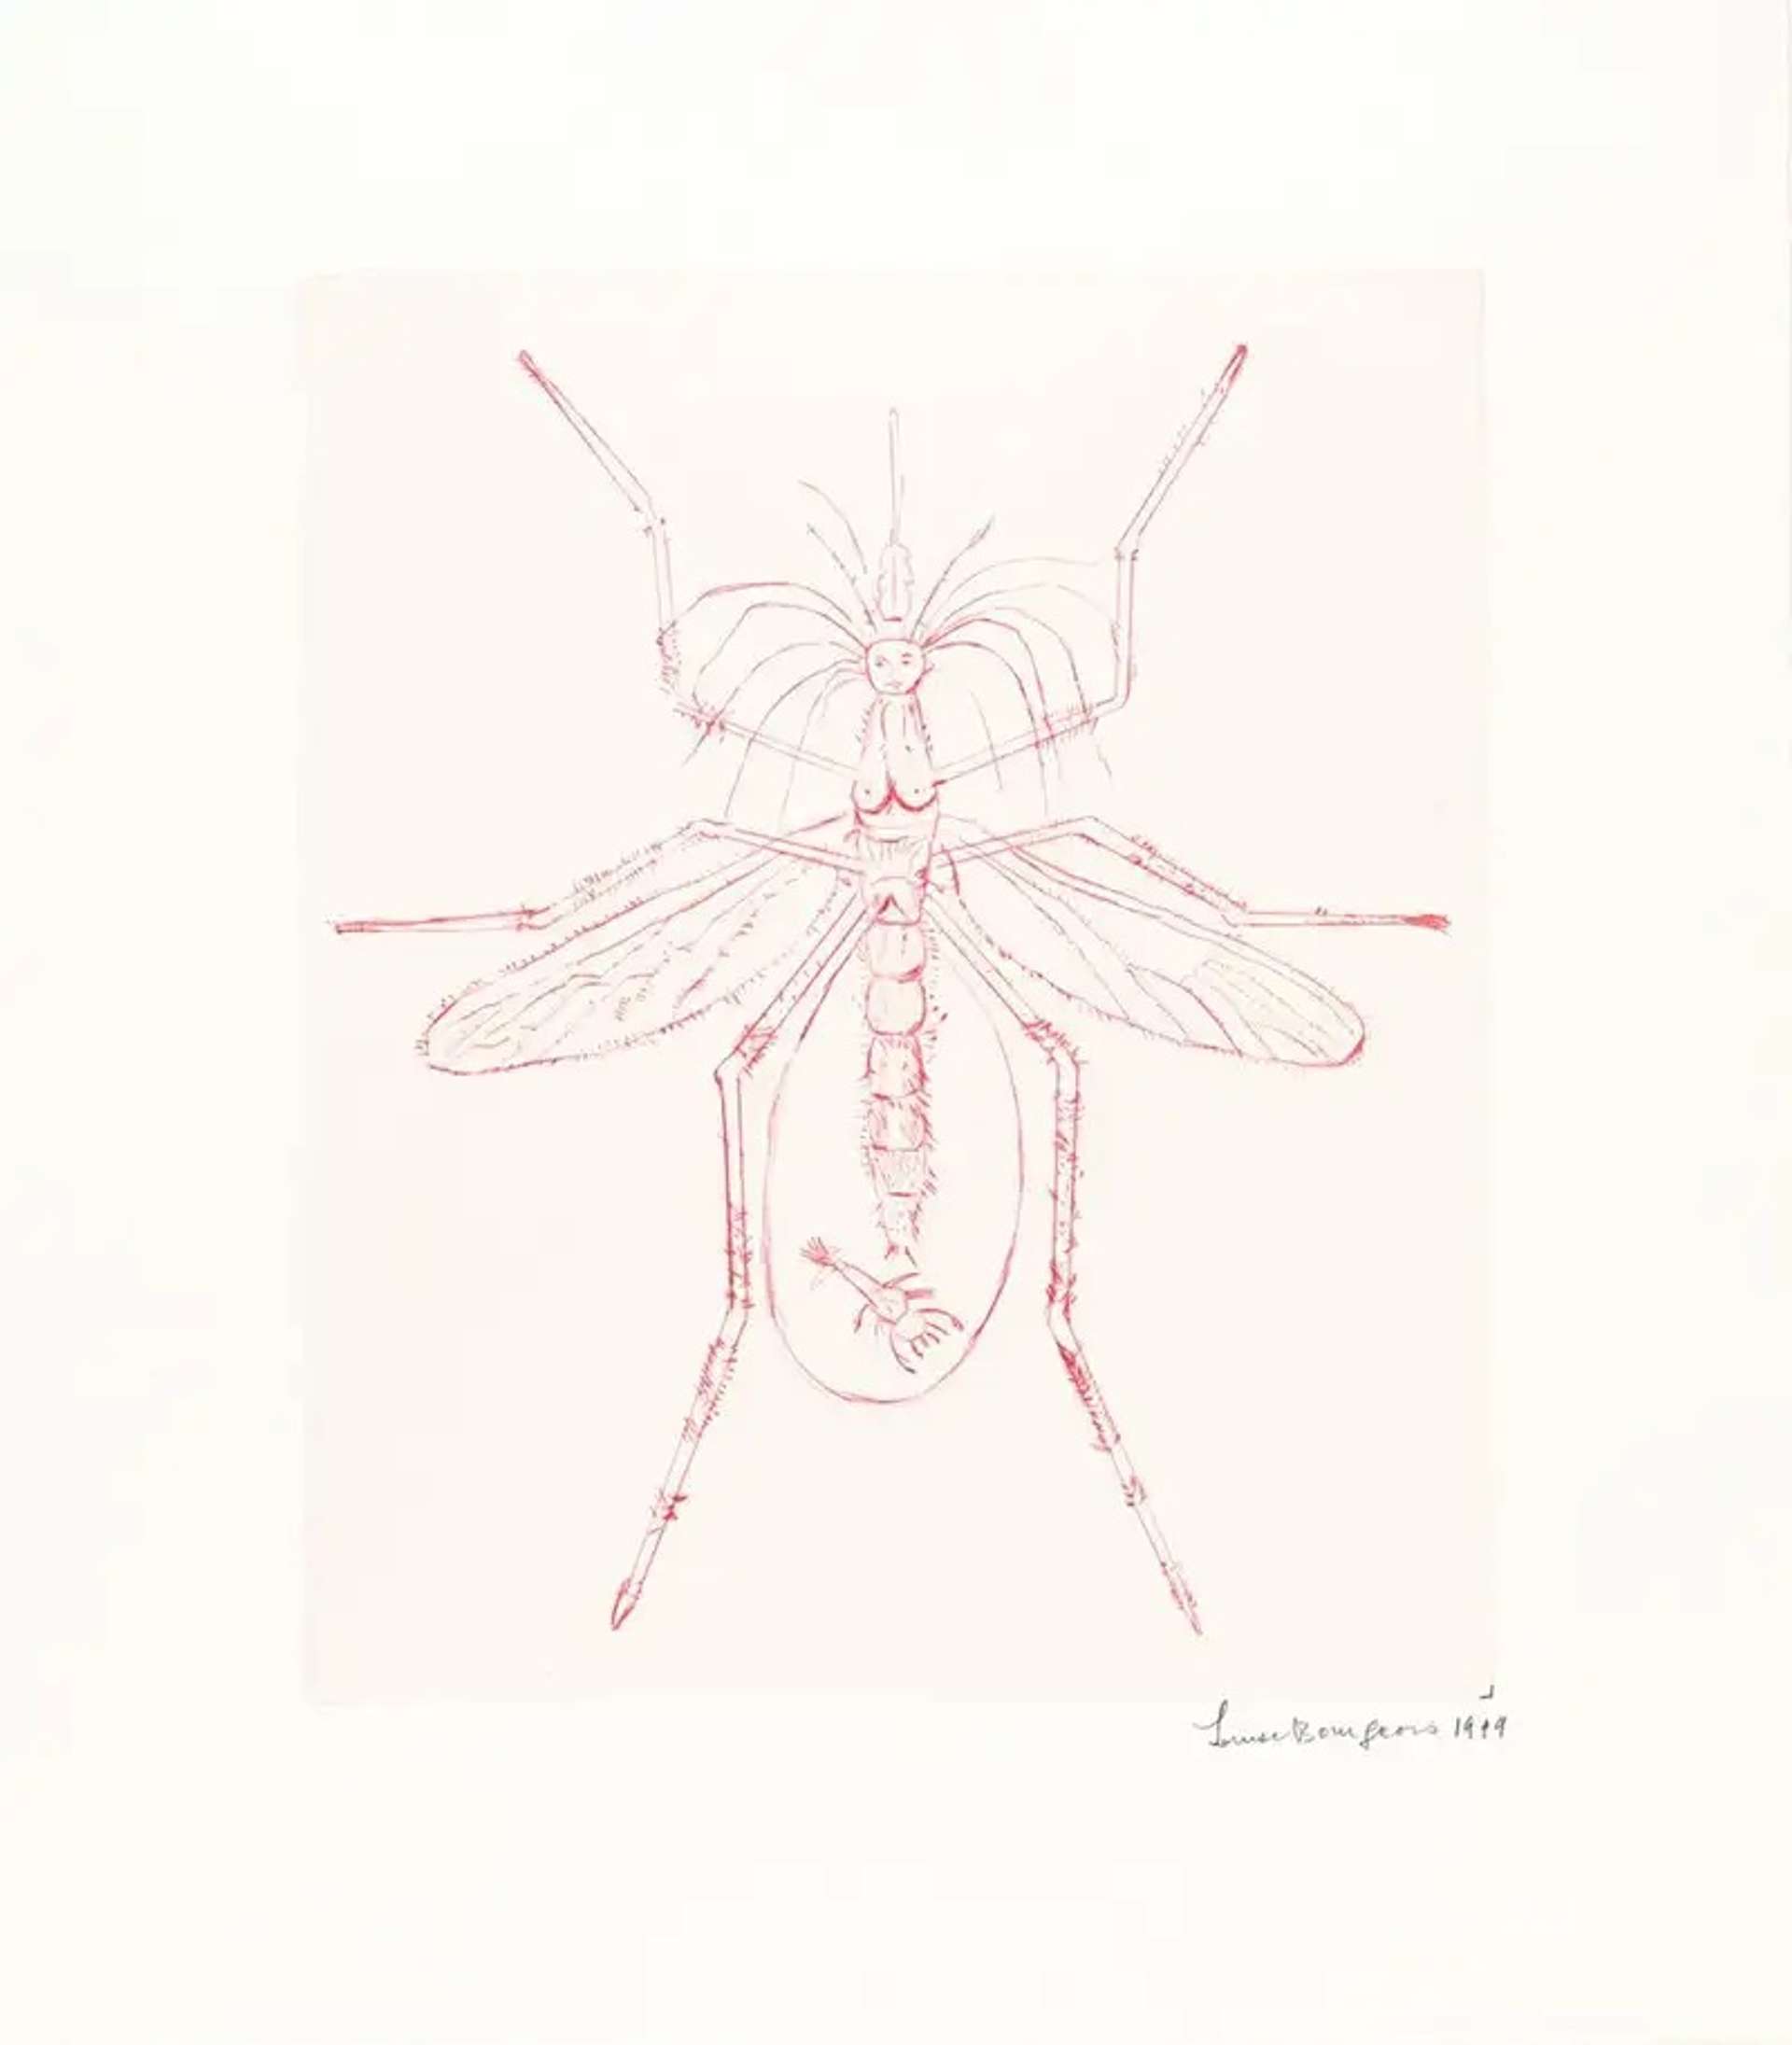 Louise Bourgeois’ Mosquito. A drypoint print of a red mosquito in the likeness of a woman with a child in its womb.